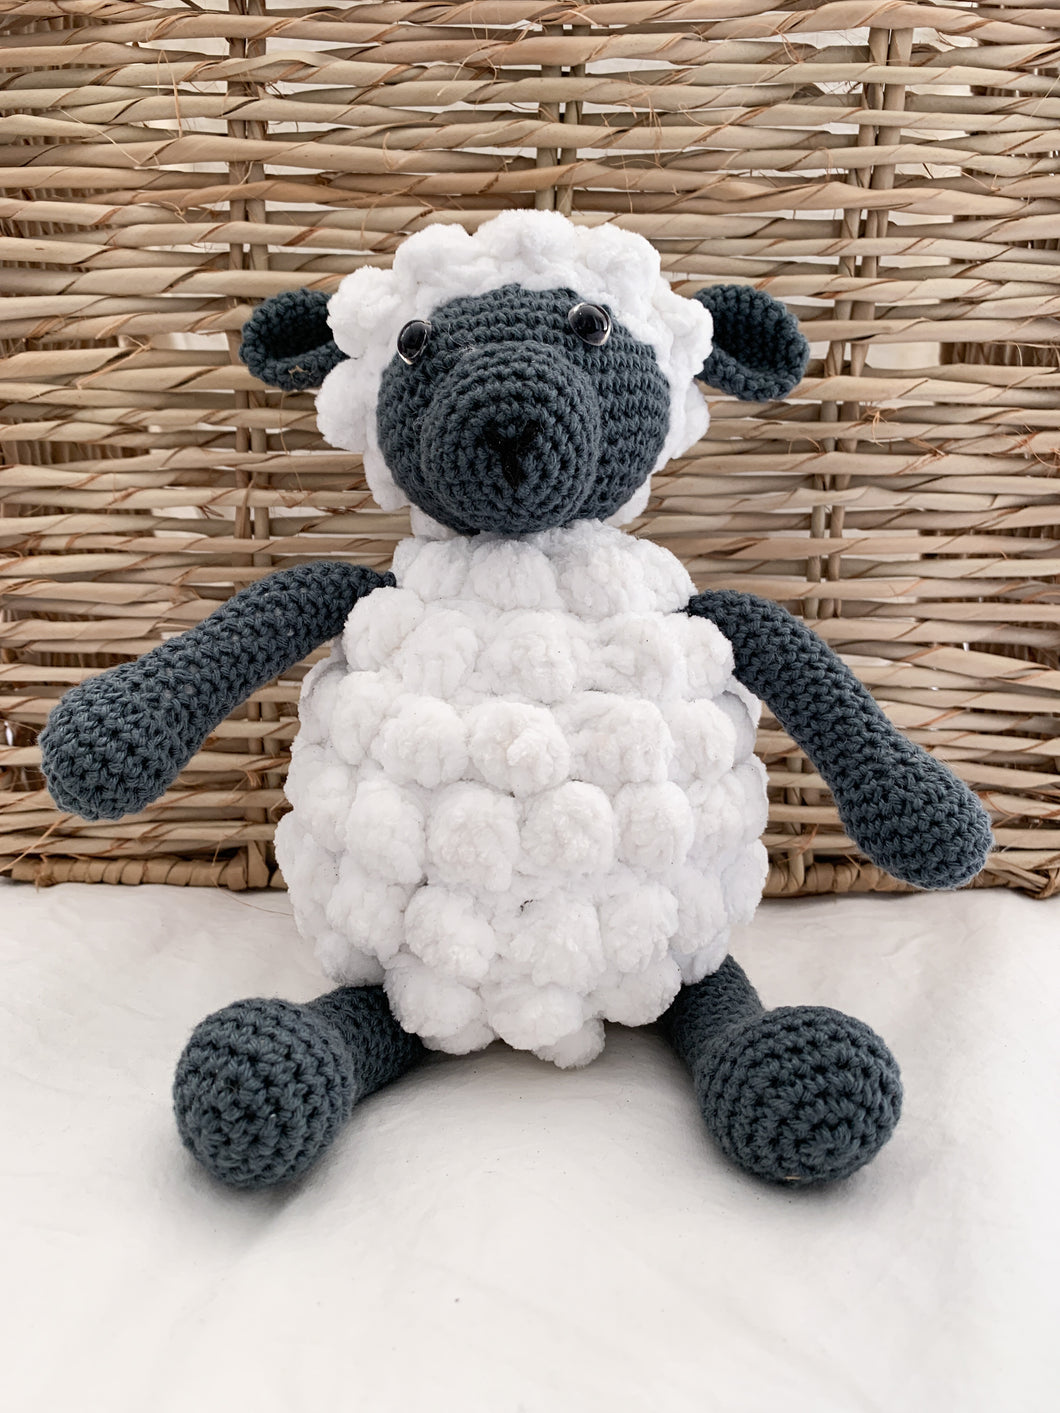 Crochet Toy - Wooly the Sheep